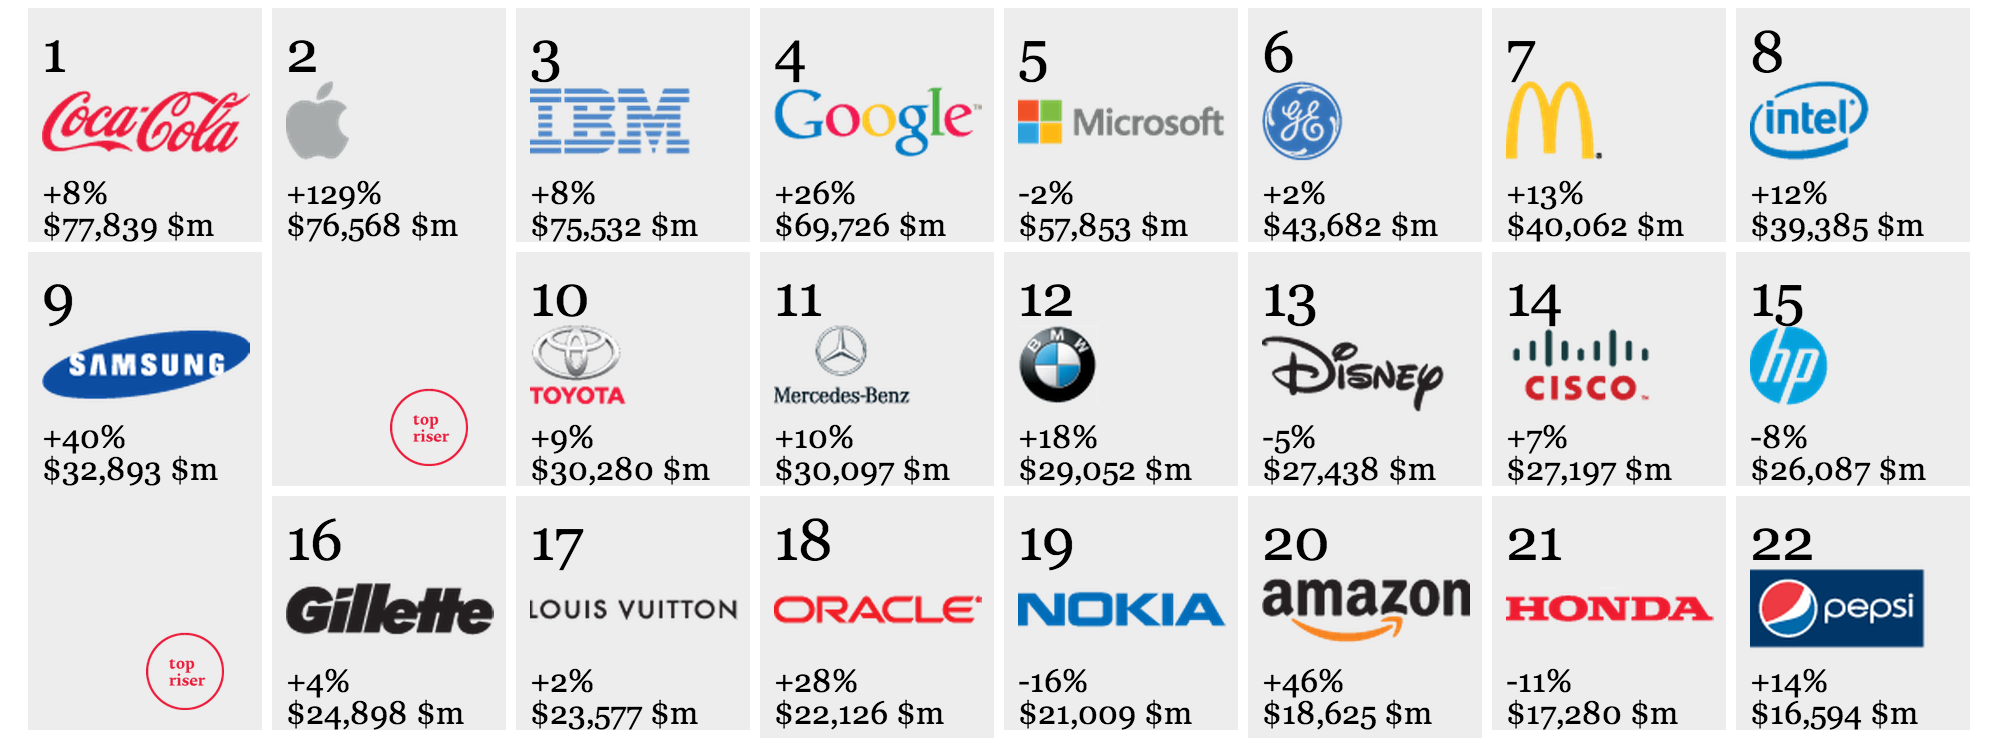 Apple jumps to No. 2 on Interbrand's Best Global Brands Report - 9to5Mac